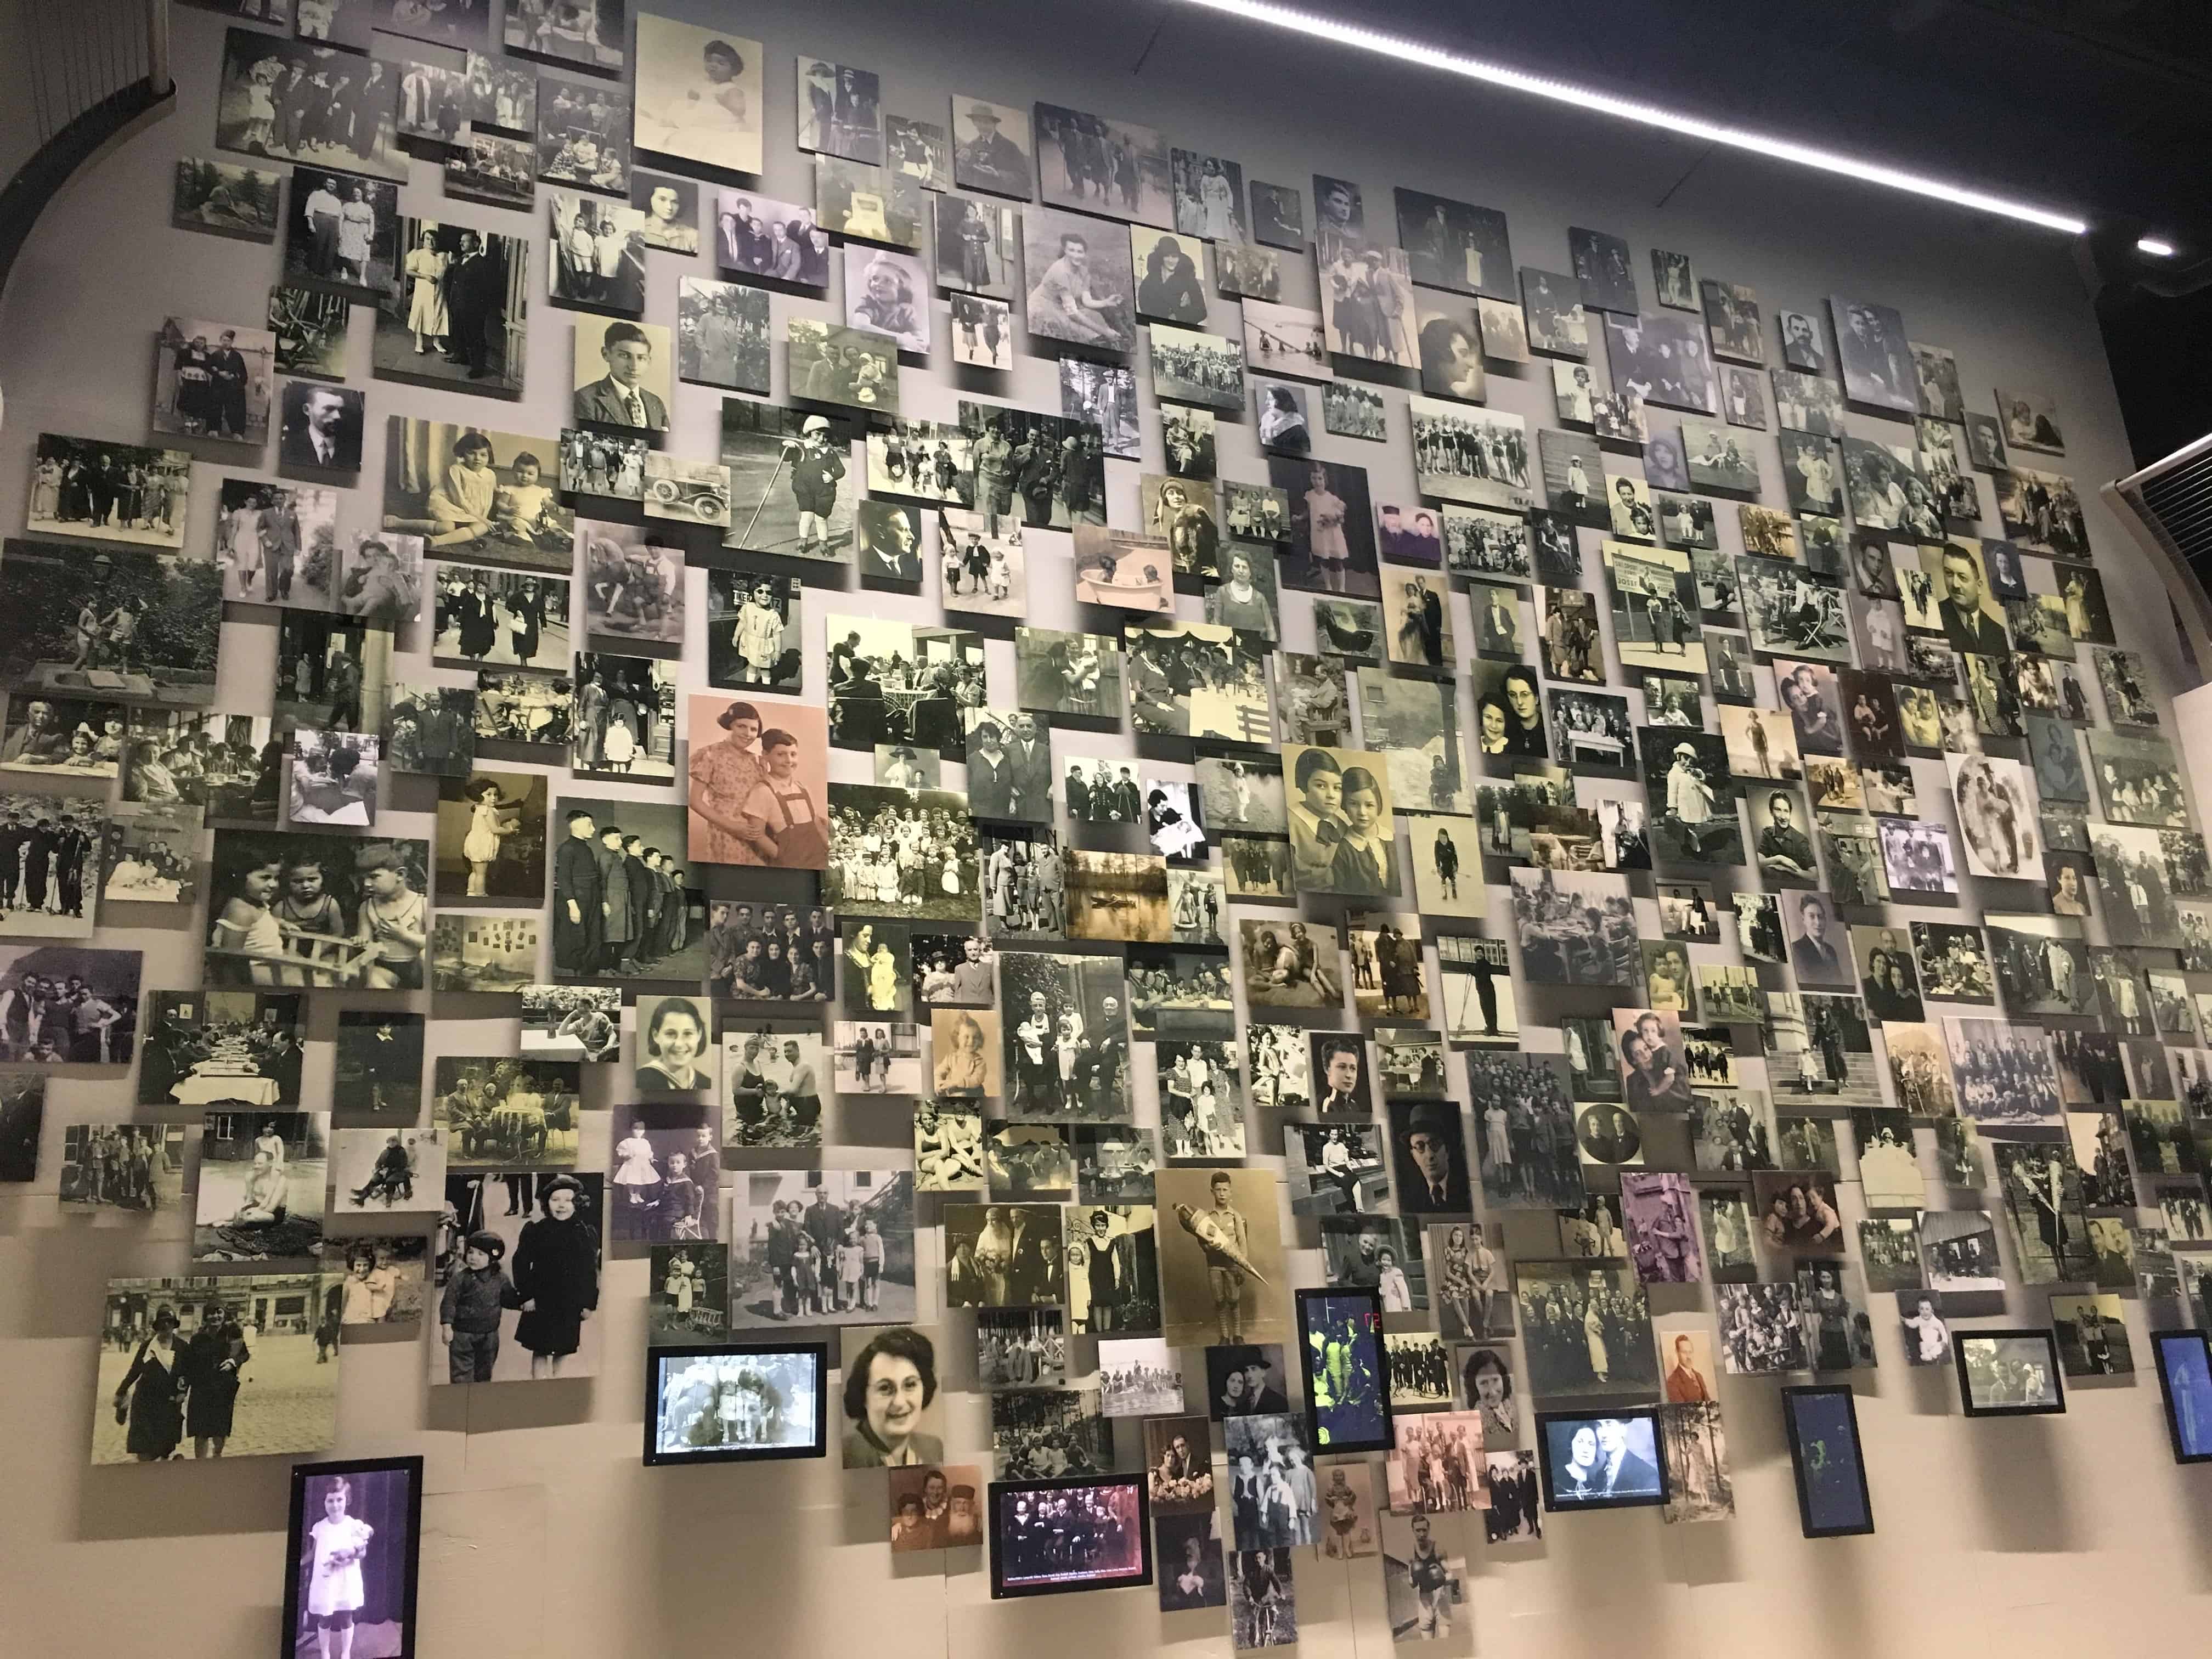 Wall of photos at the Florida Holocaust Museum in St. Petersburg, Florida